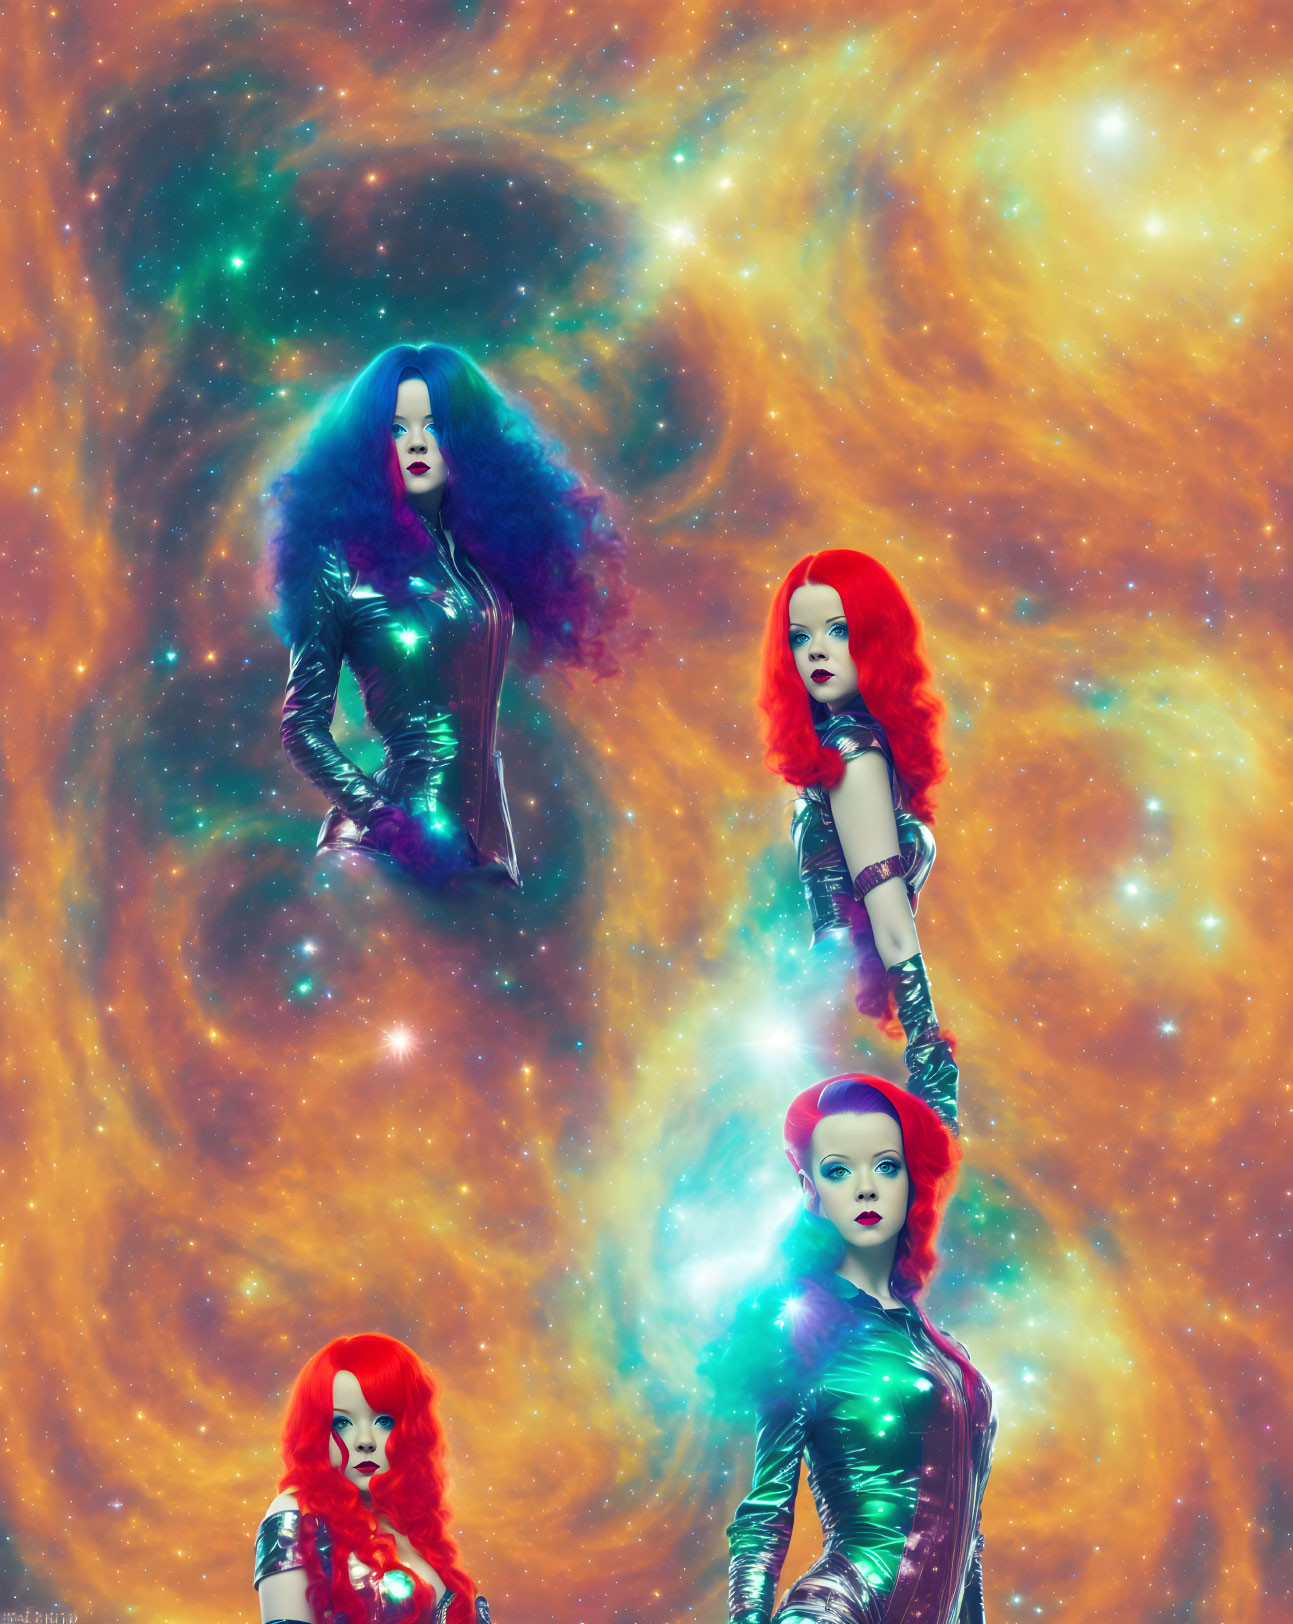 Four female figures with different hair colors in cosmic setting